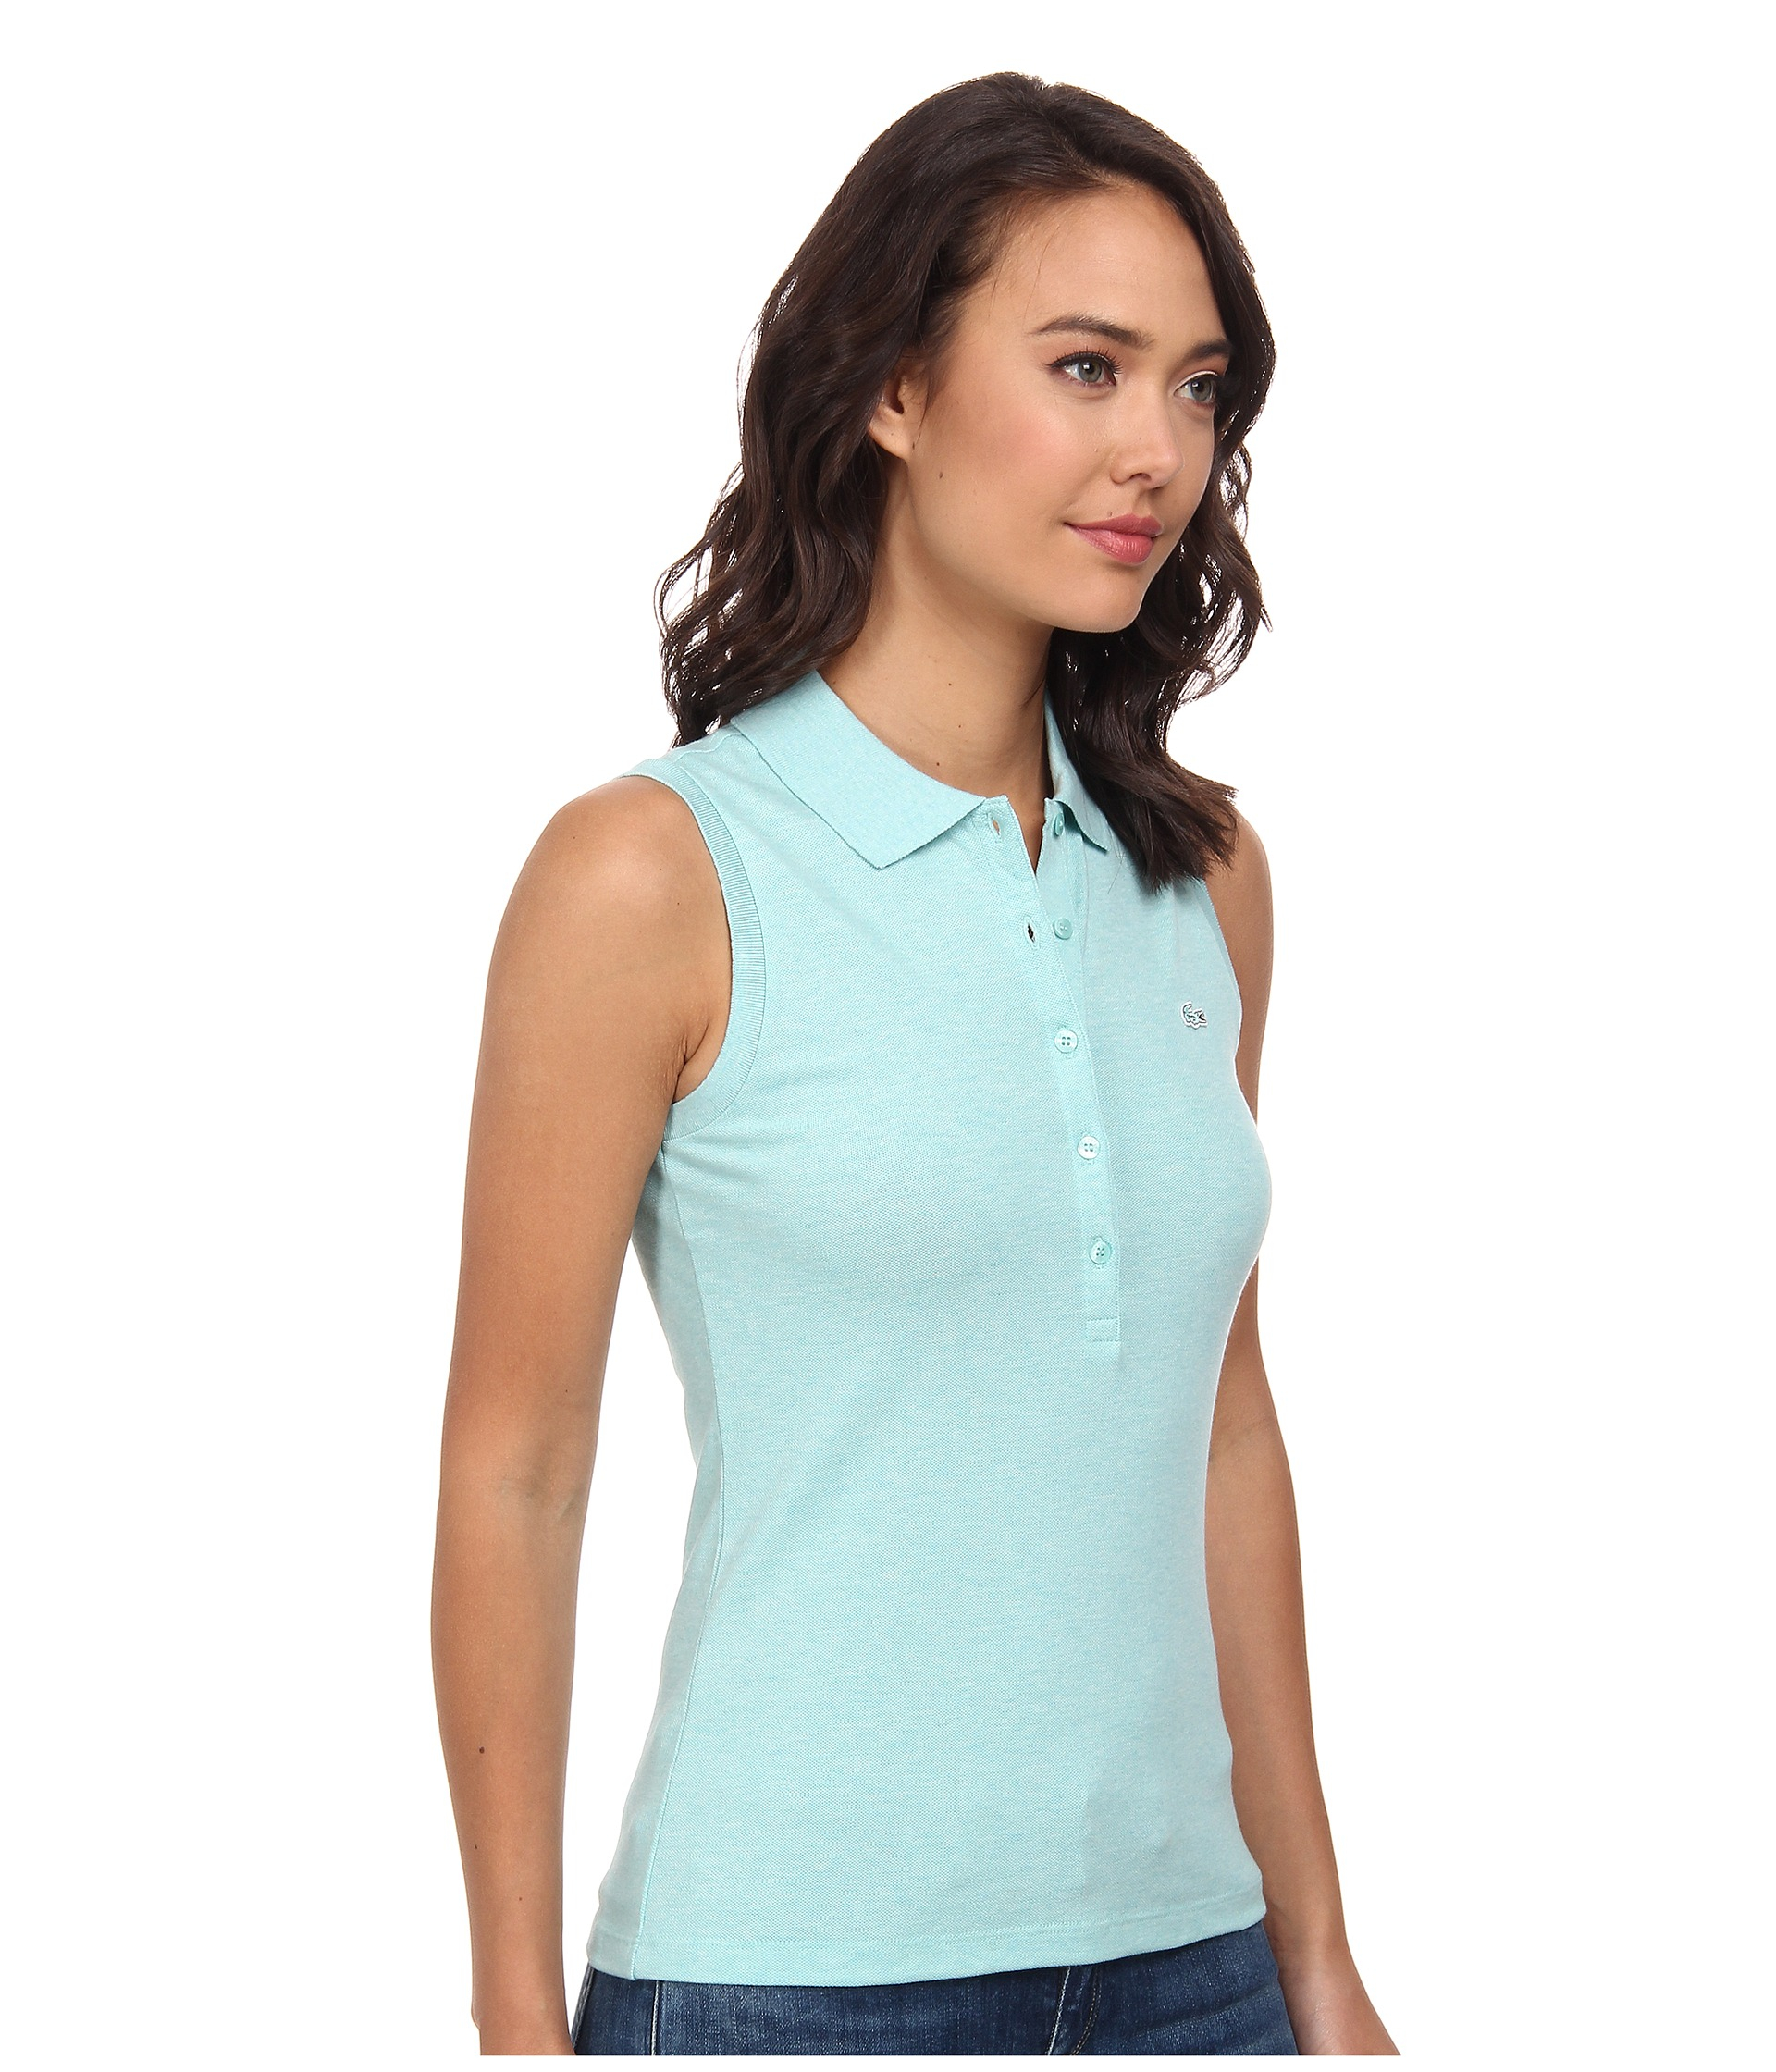 Lacoste Sleeveless Slim Fit Stretch Pique Polo Shirt in Blue (Corsica ...